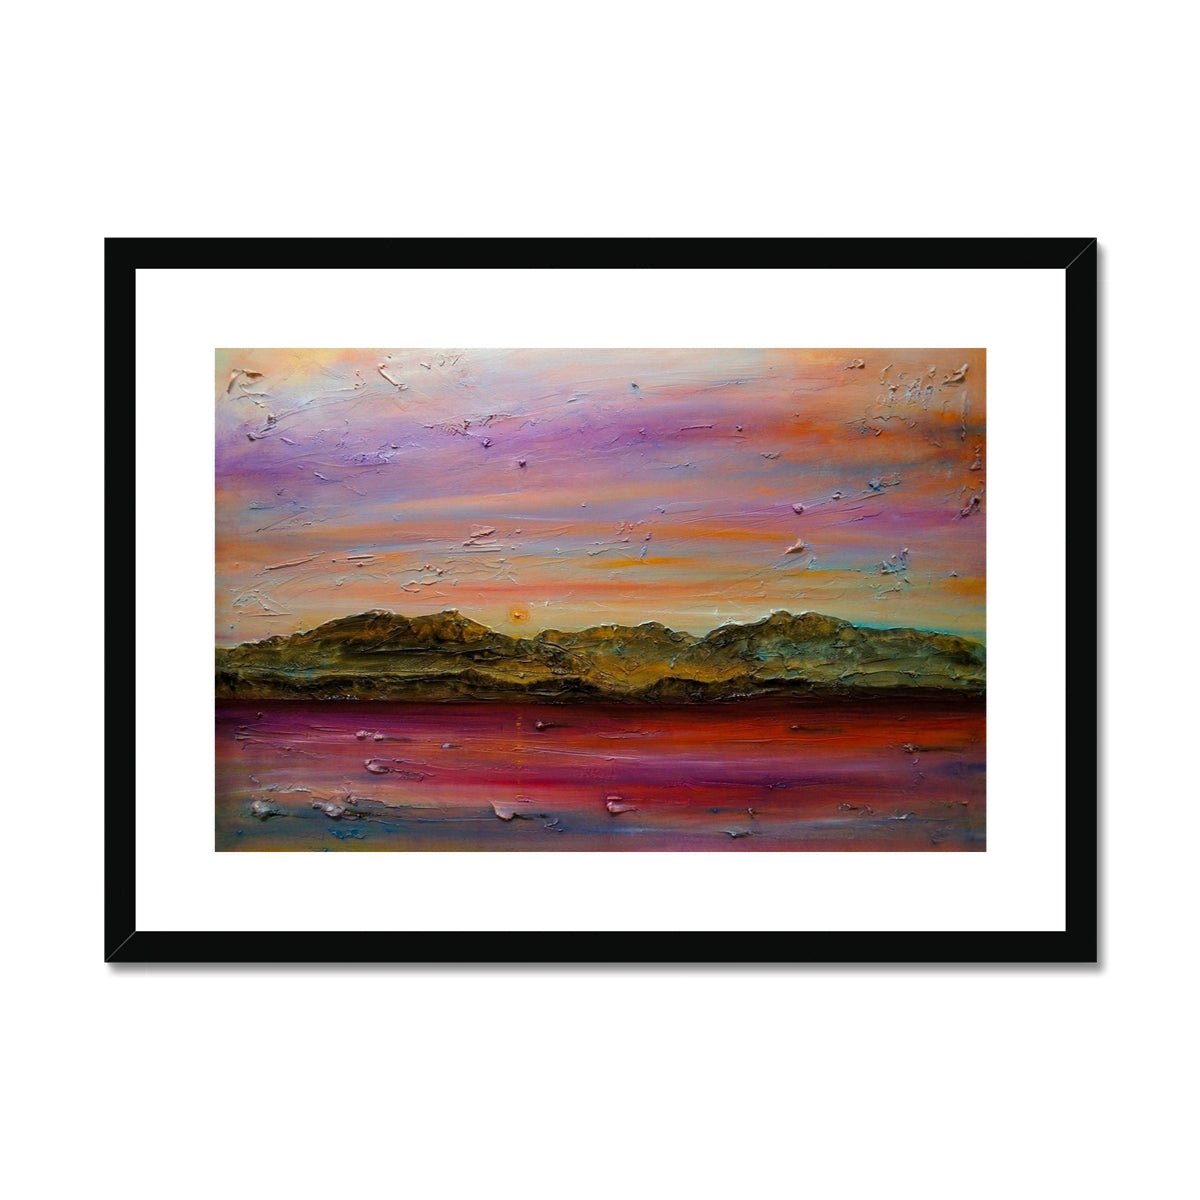 Arran Autumn Dusk Painting | Framed & Mounted Prints From Scotland-Framed & Mounted Prints-Arran Art Gallery-A2 Landscape-Black Frame-Paintings, Prints, Homeware, Art Gifts From Scotland By Scottish Artist Kevin Hunter